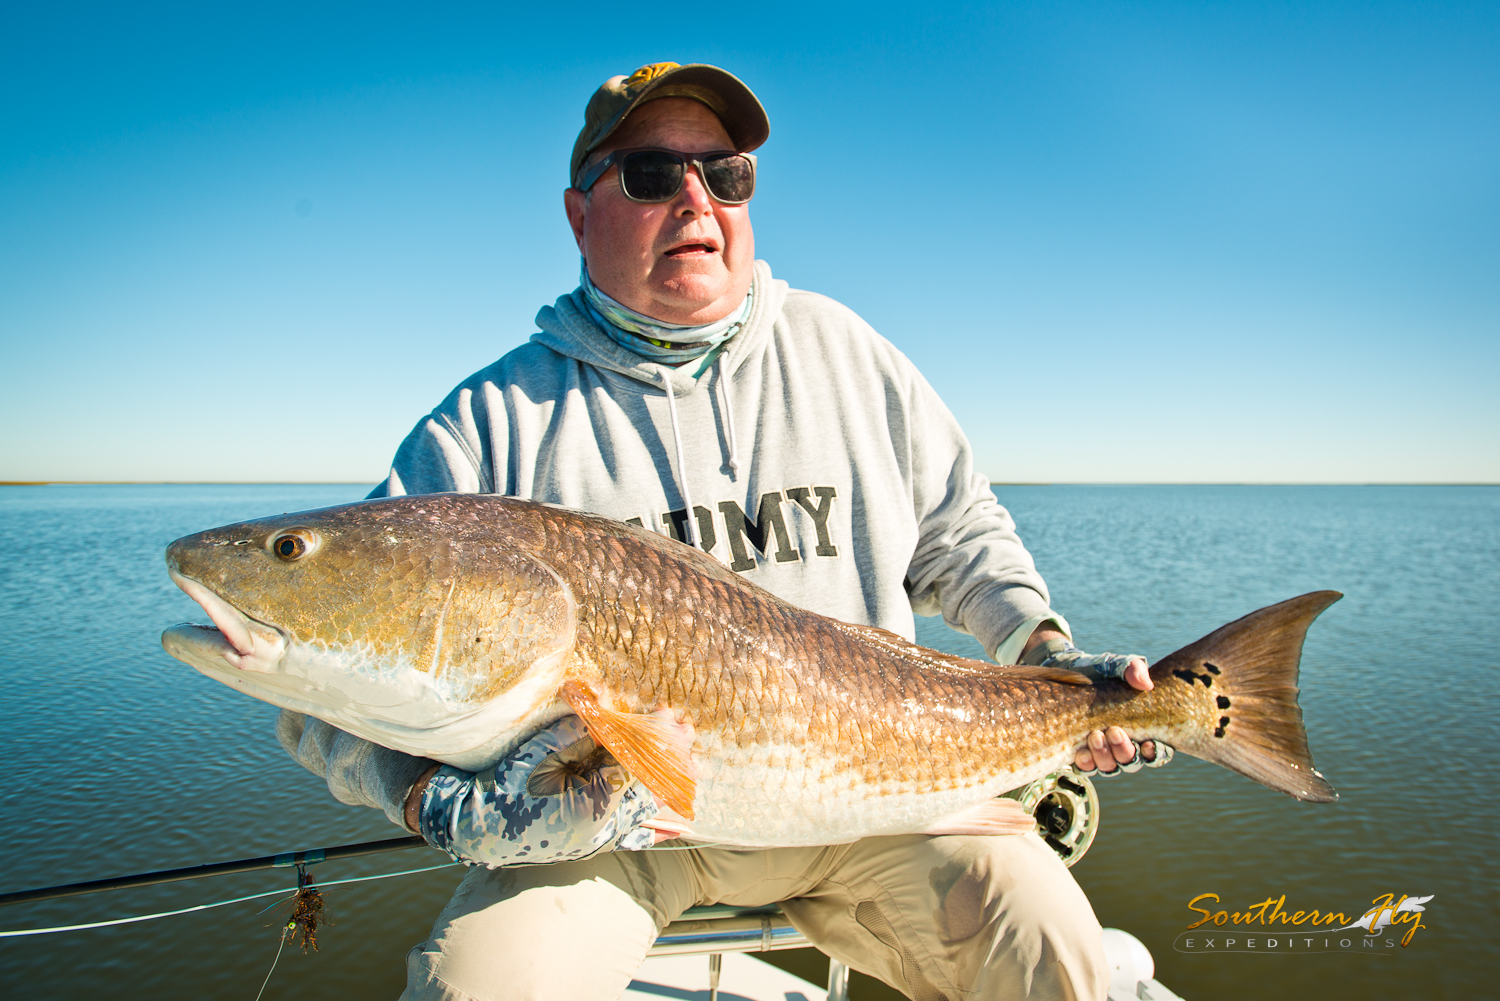 things to do on bachelors trips in new orleans - charter fishing guides Southern Fly Expeditions 